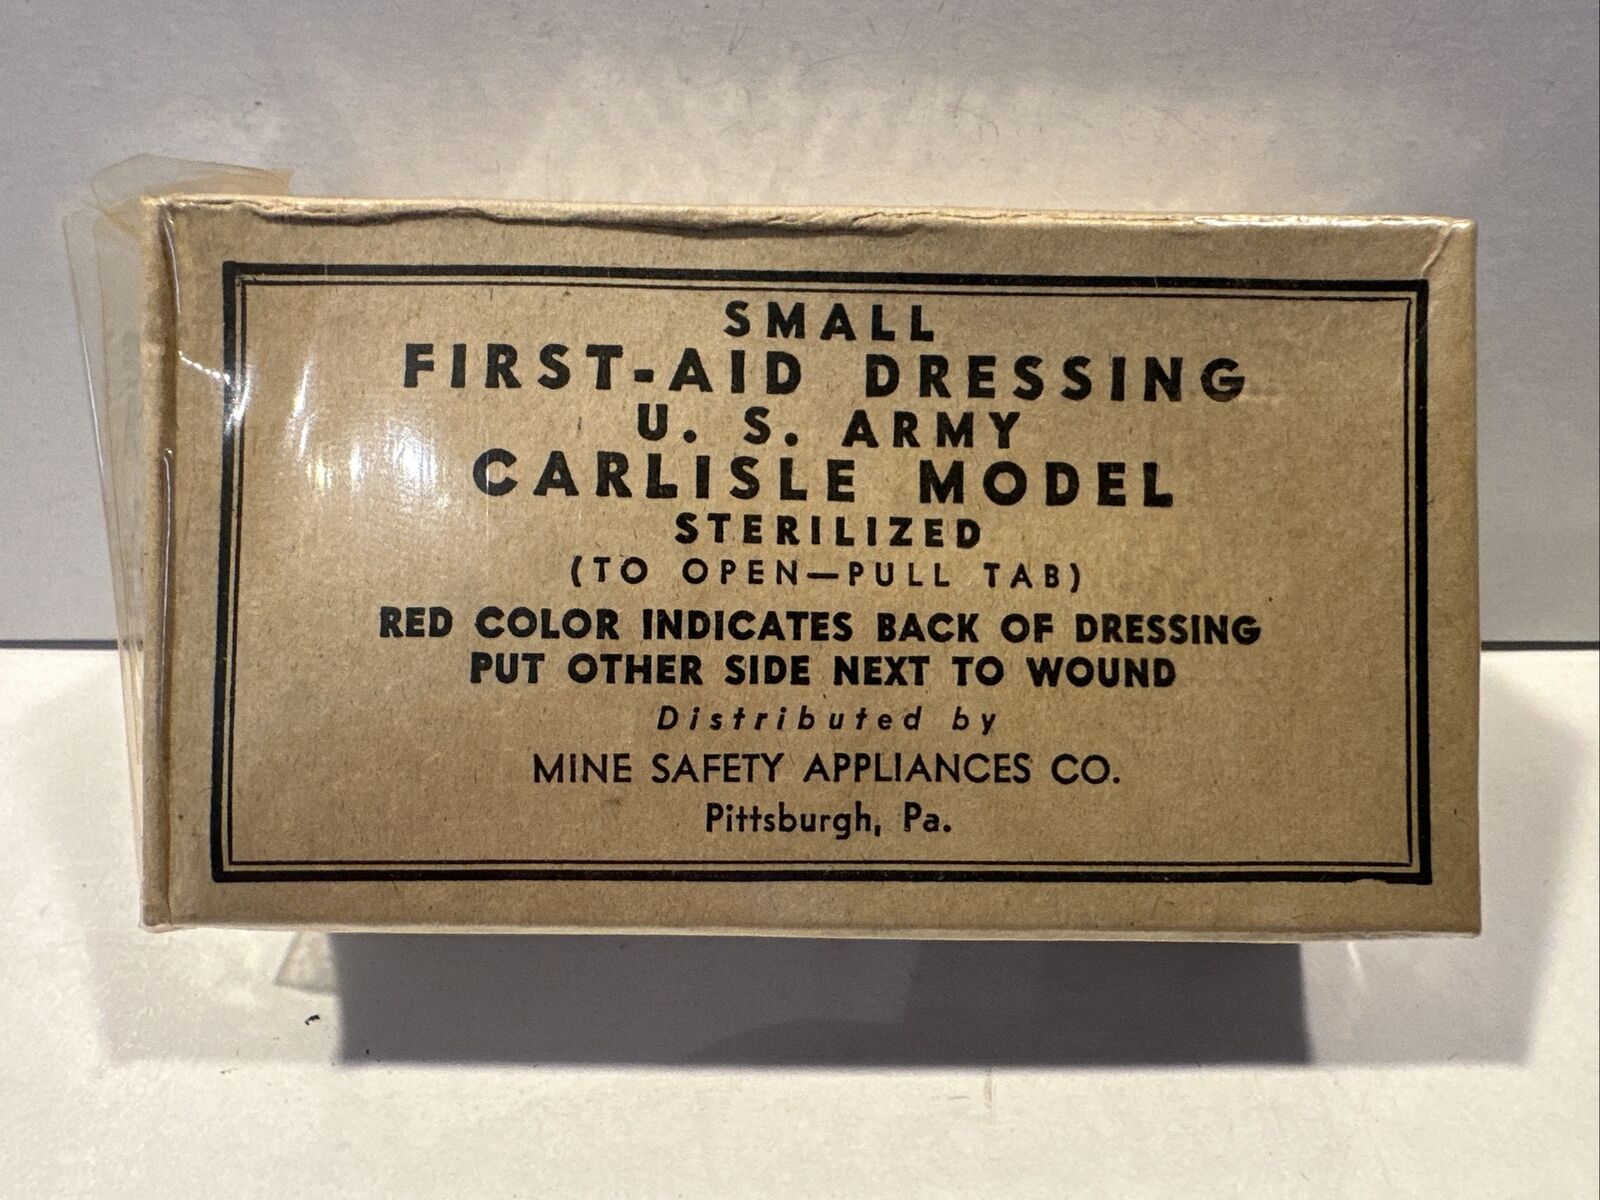 US Army Vintage Small First Aid Dressing Carlisle Model Mine Safety Appliances